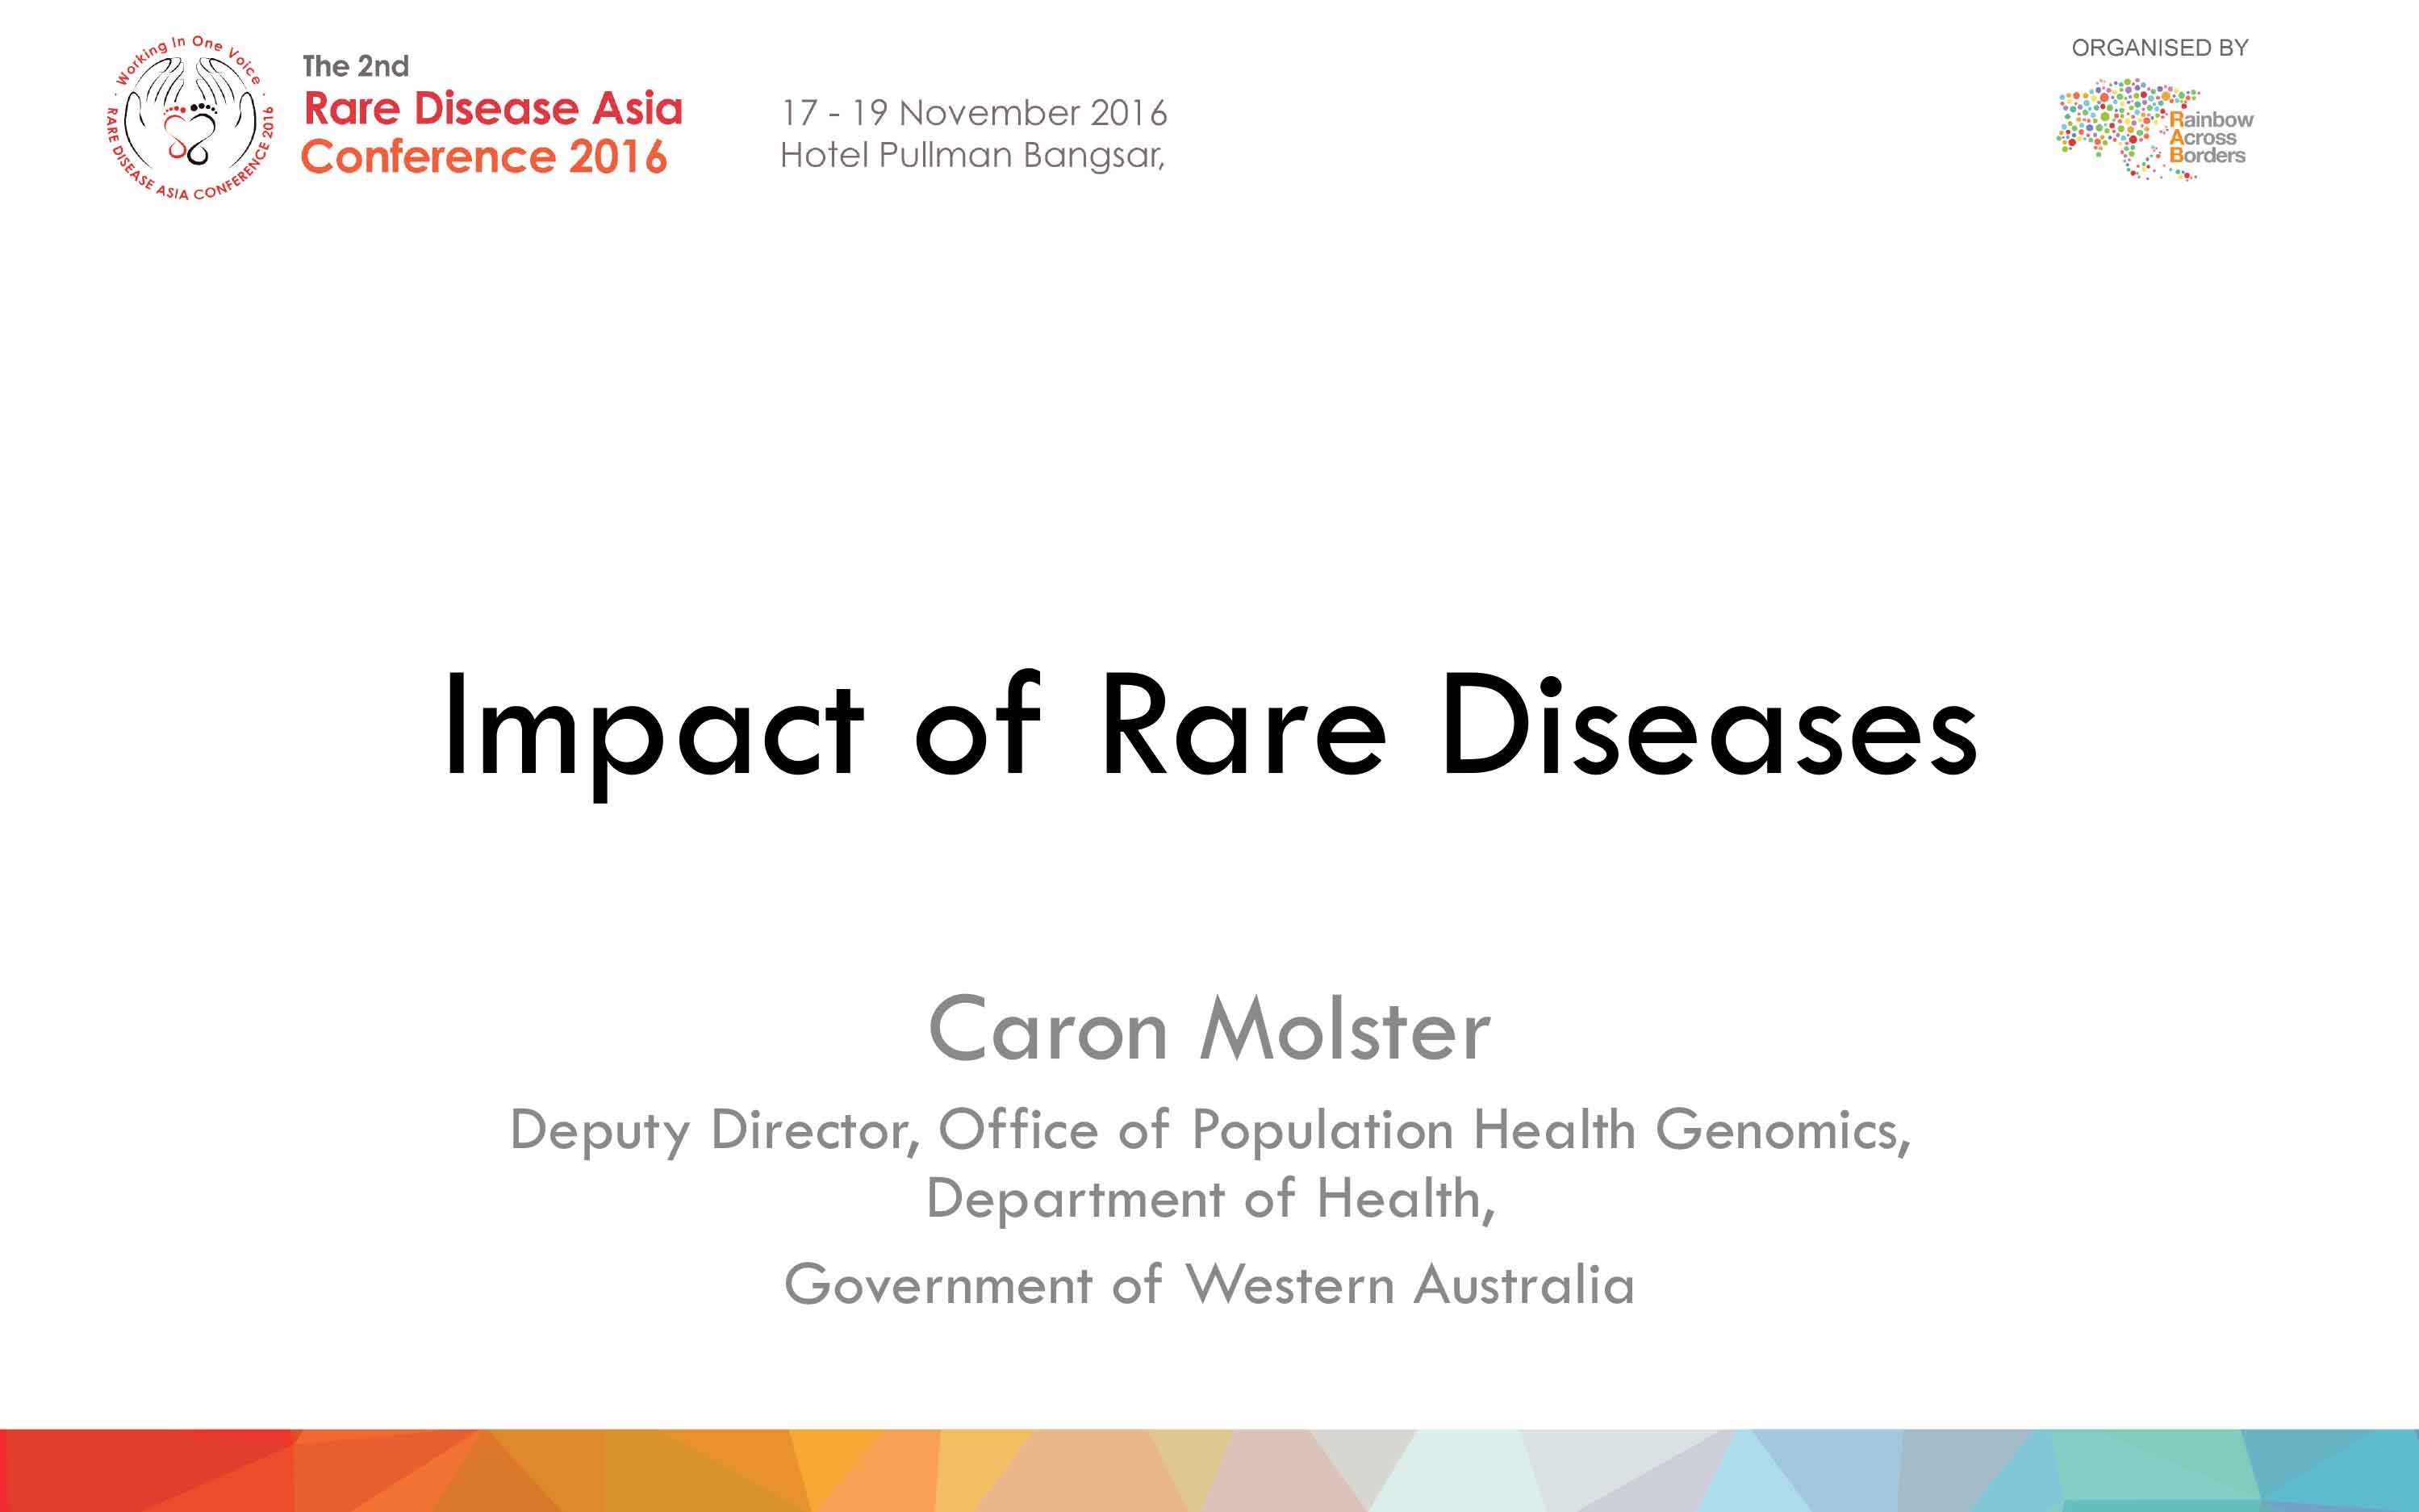 Caron Molster (Deputy Director, Office of Population Health Genomics, Department of Health, Government of Western Australia) - Impact of Rare Diseases